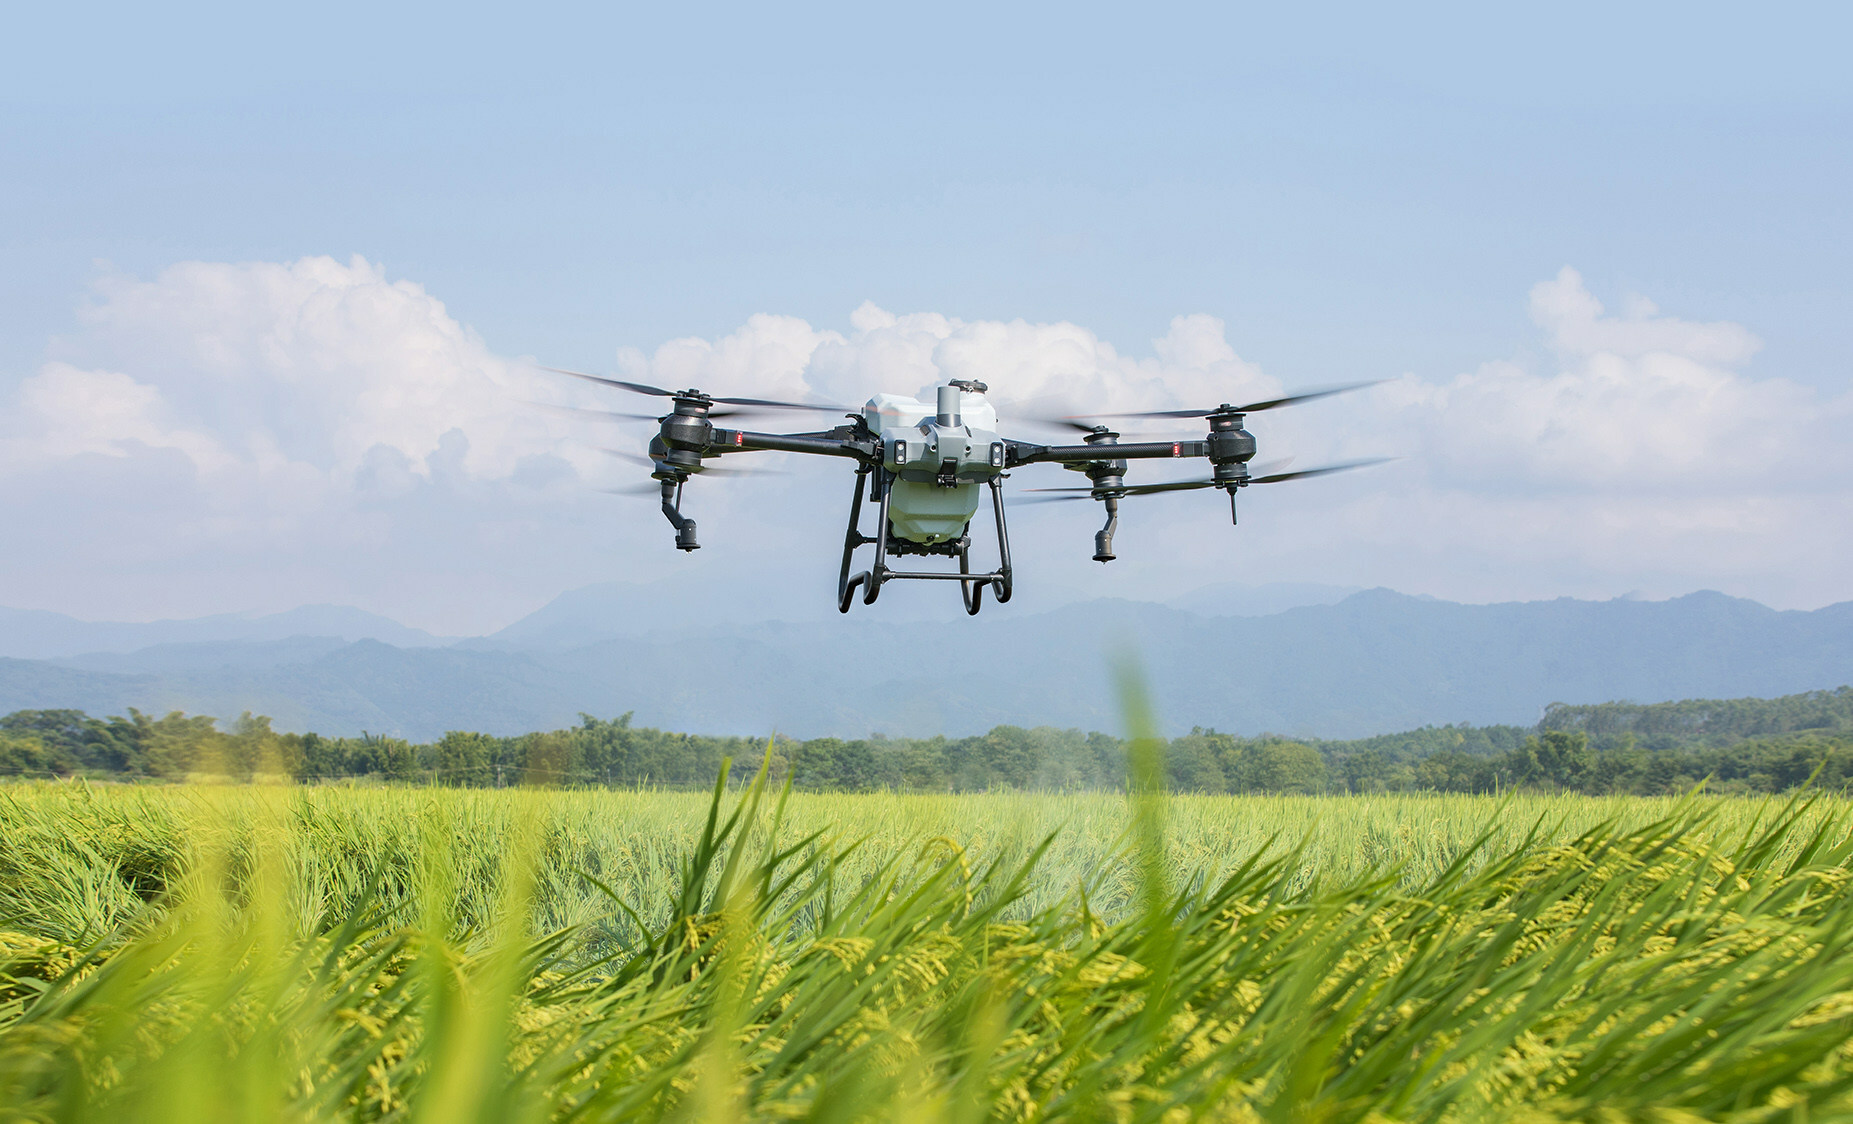 Over 200,000 DJI agriculture drones in use globally: Report